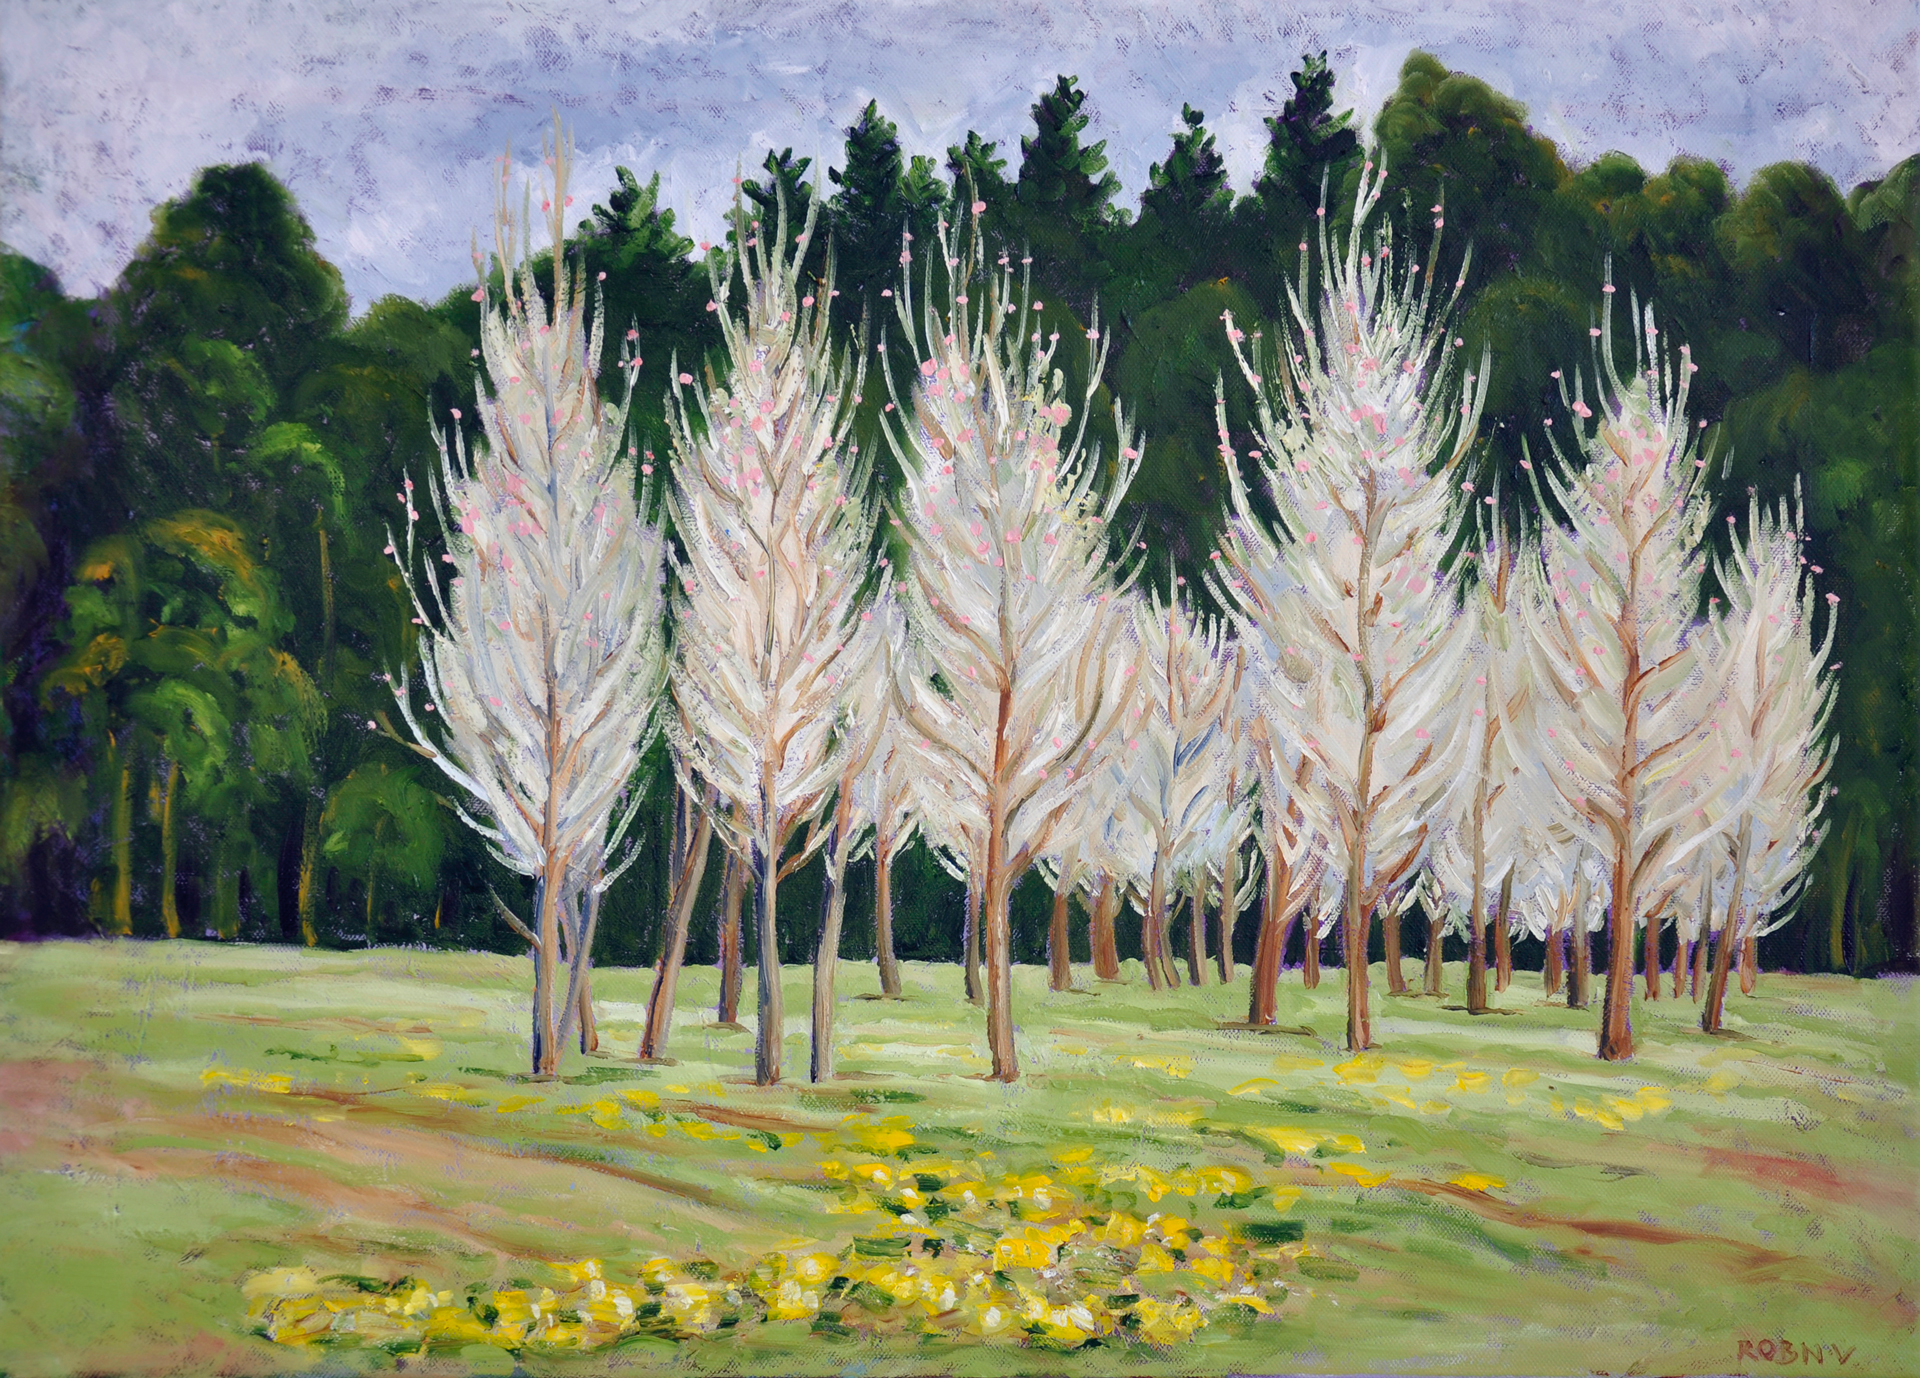 44. Robyn Varpins, The First Hint of Spring, oil on canvas $600